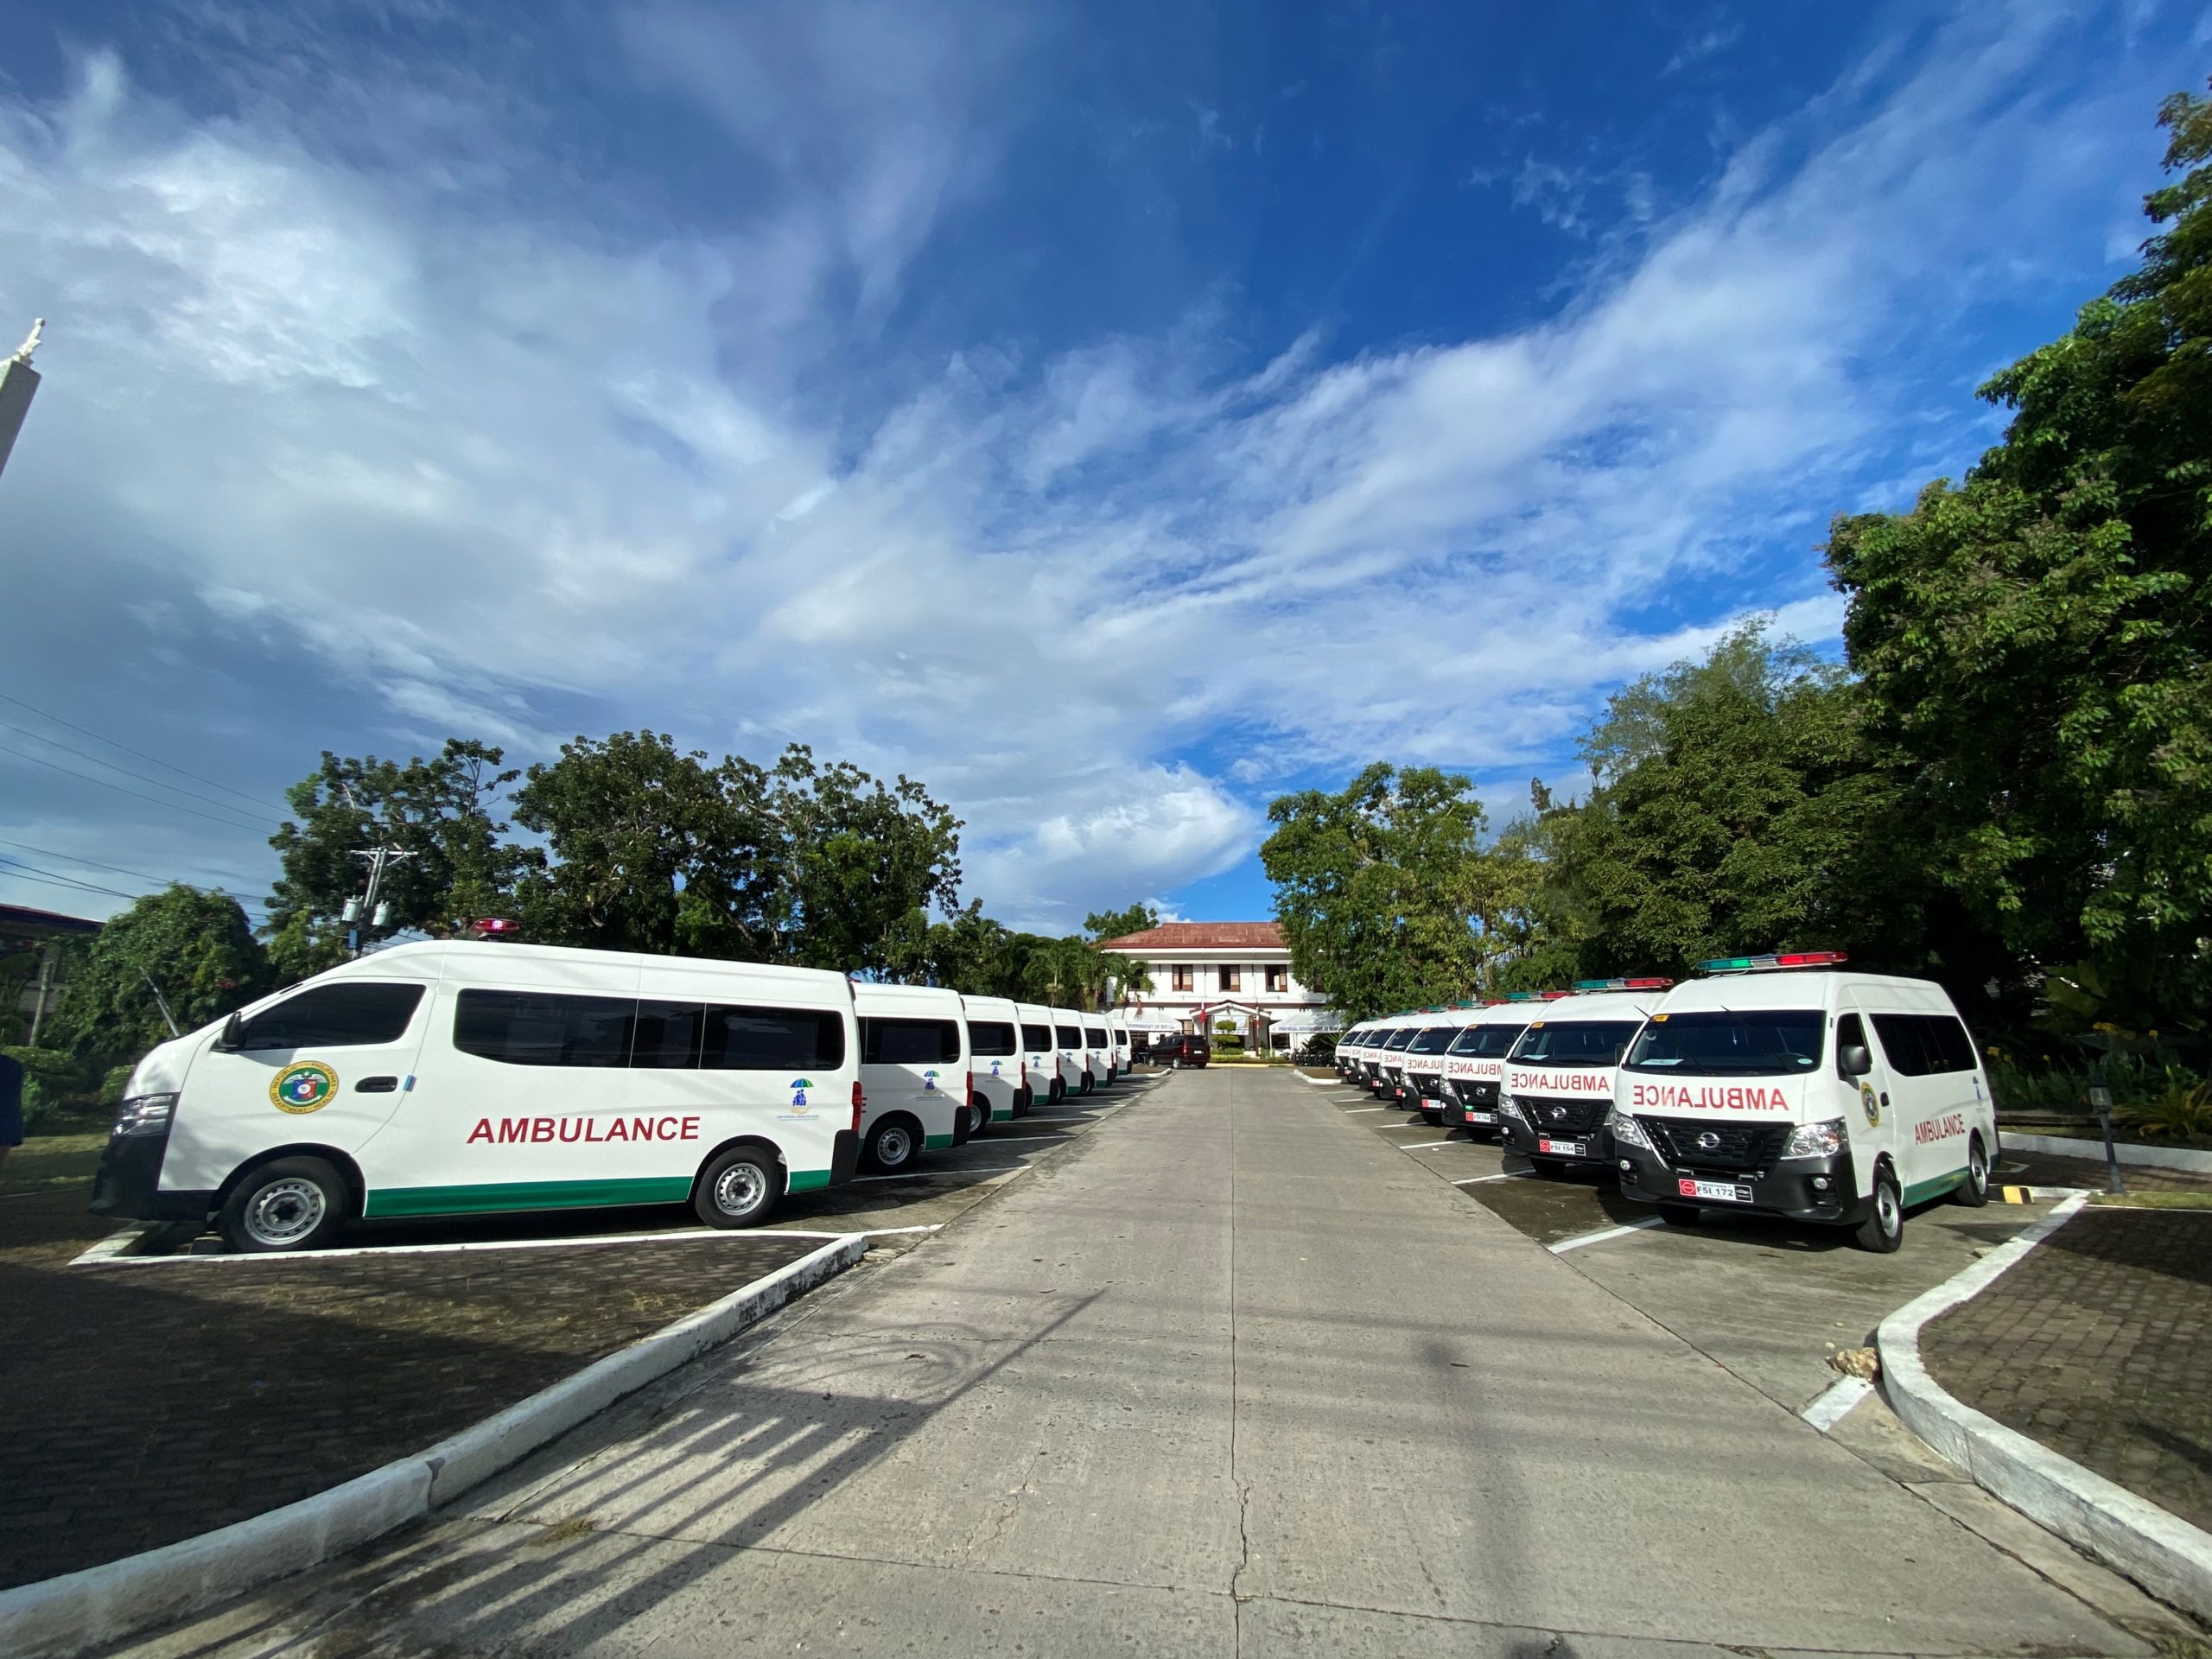 At least 27 ambulances were turned over to Bohol towns